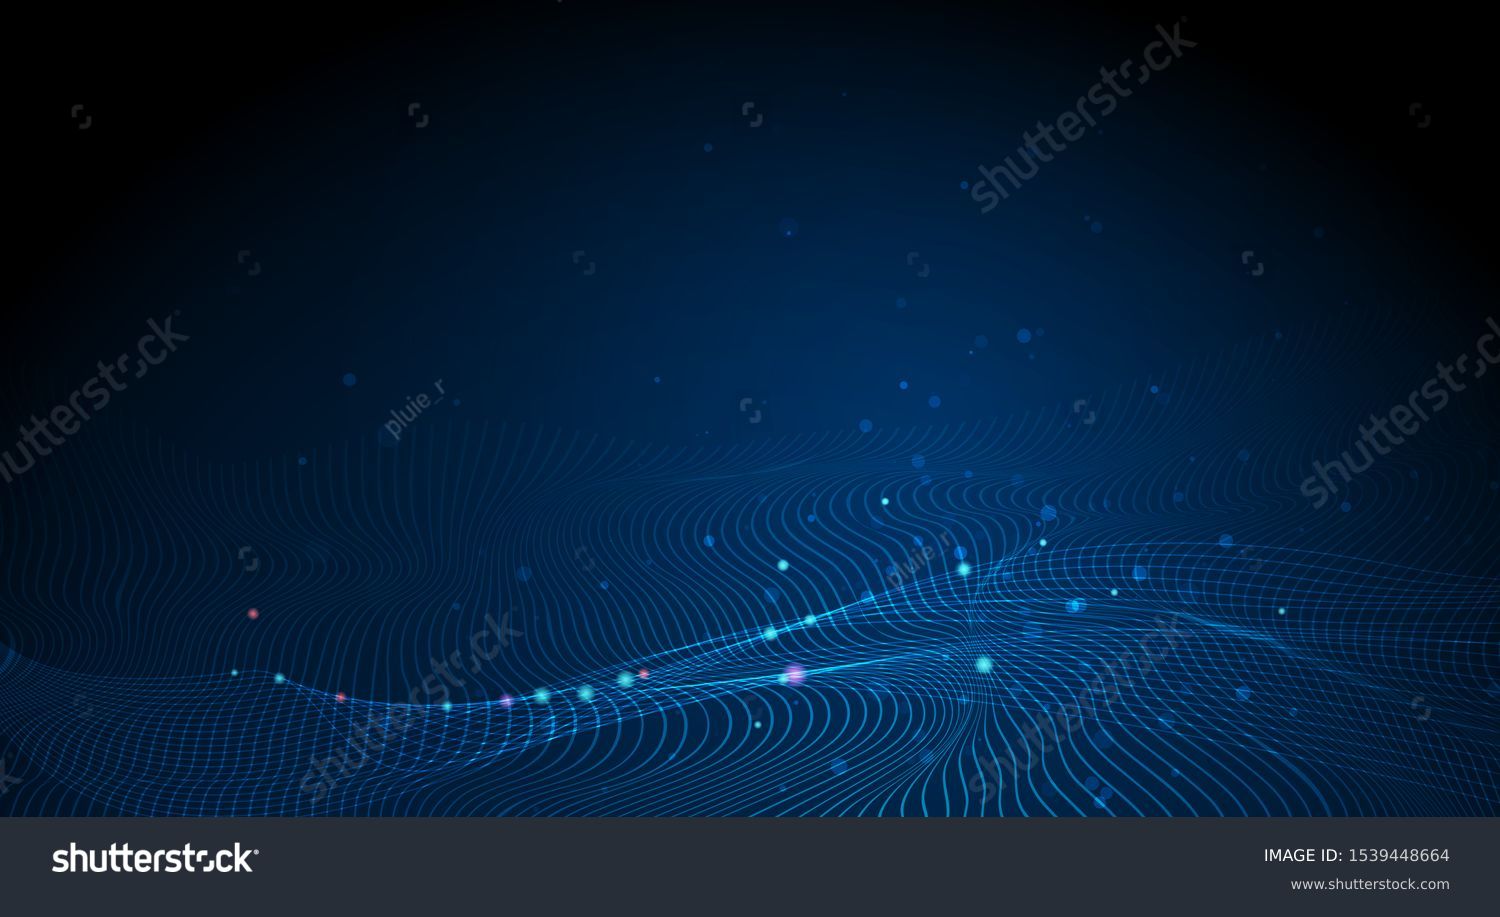 Illustration vector abstract wave motion pattern and dynamic mesh line on dark blue background. Modern futuristic design for background or wallpaper. Digital cyberspace, high tech, technology  concept #1539448664